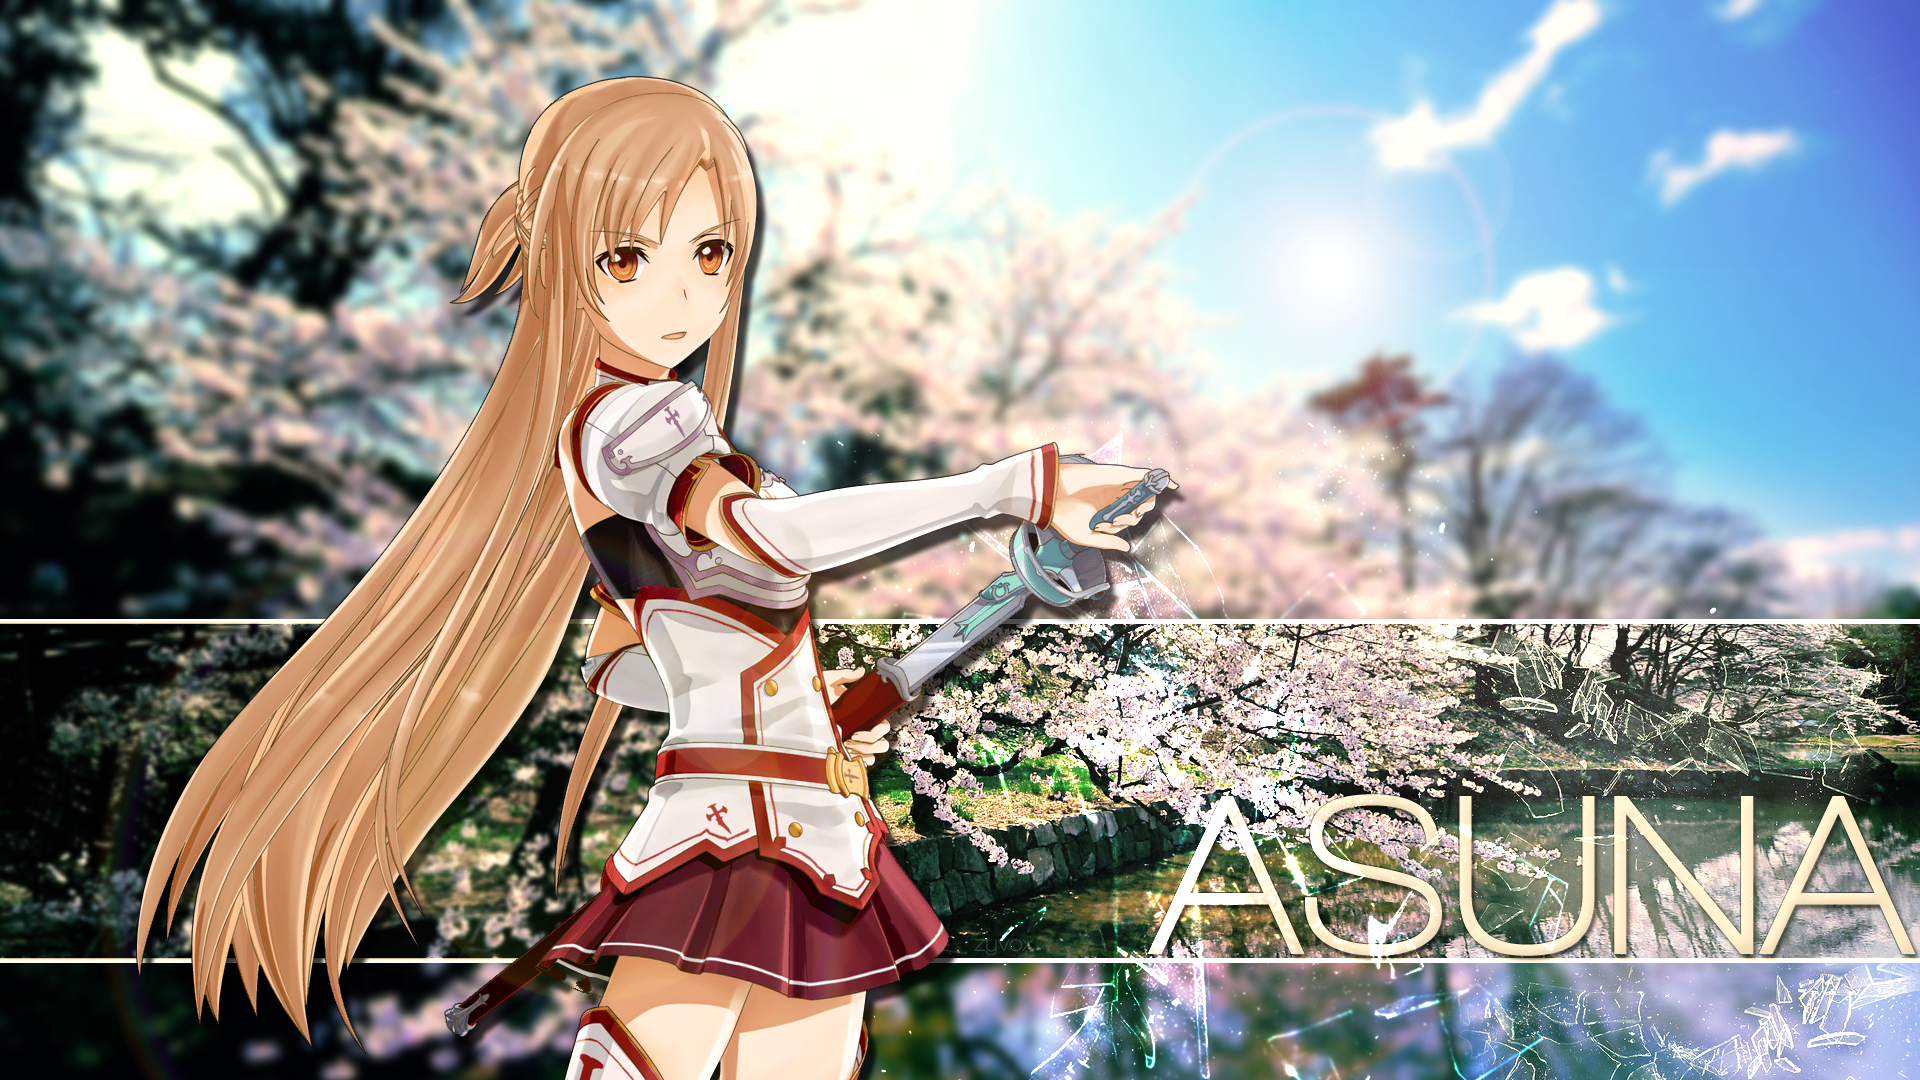 HD desktop wallpaper featuring Asuna Yuuki from Sword Art Online, wielding a sword with a backdrop of Aincrad and cherry blossoms.